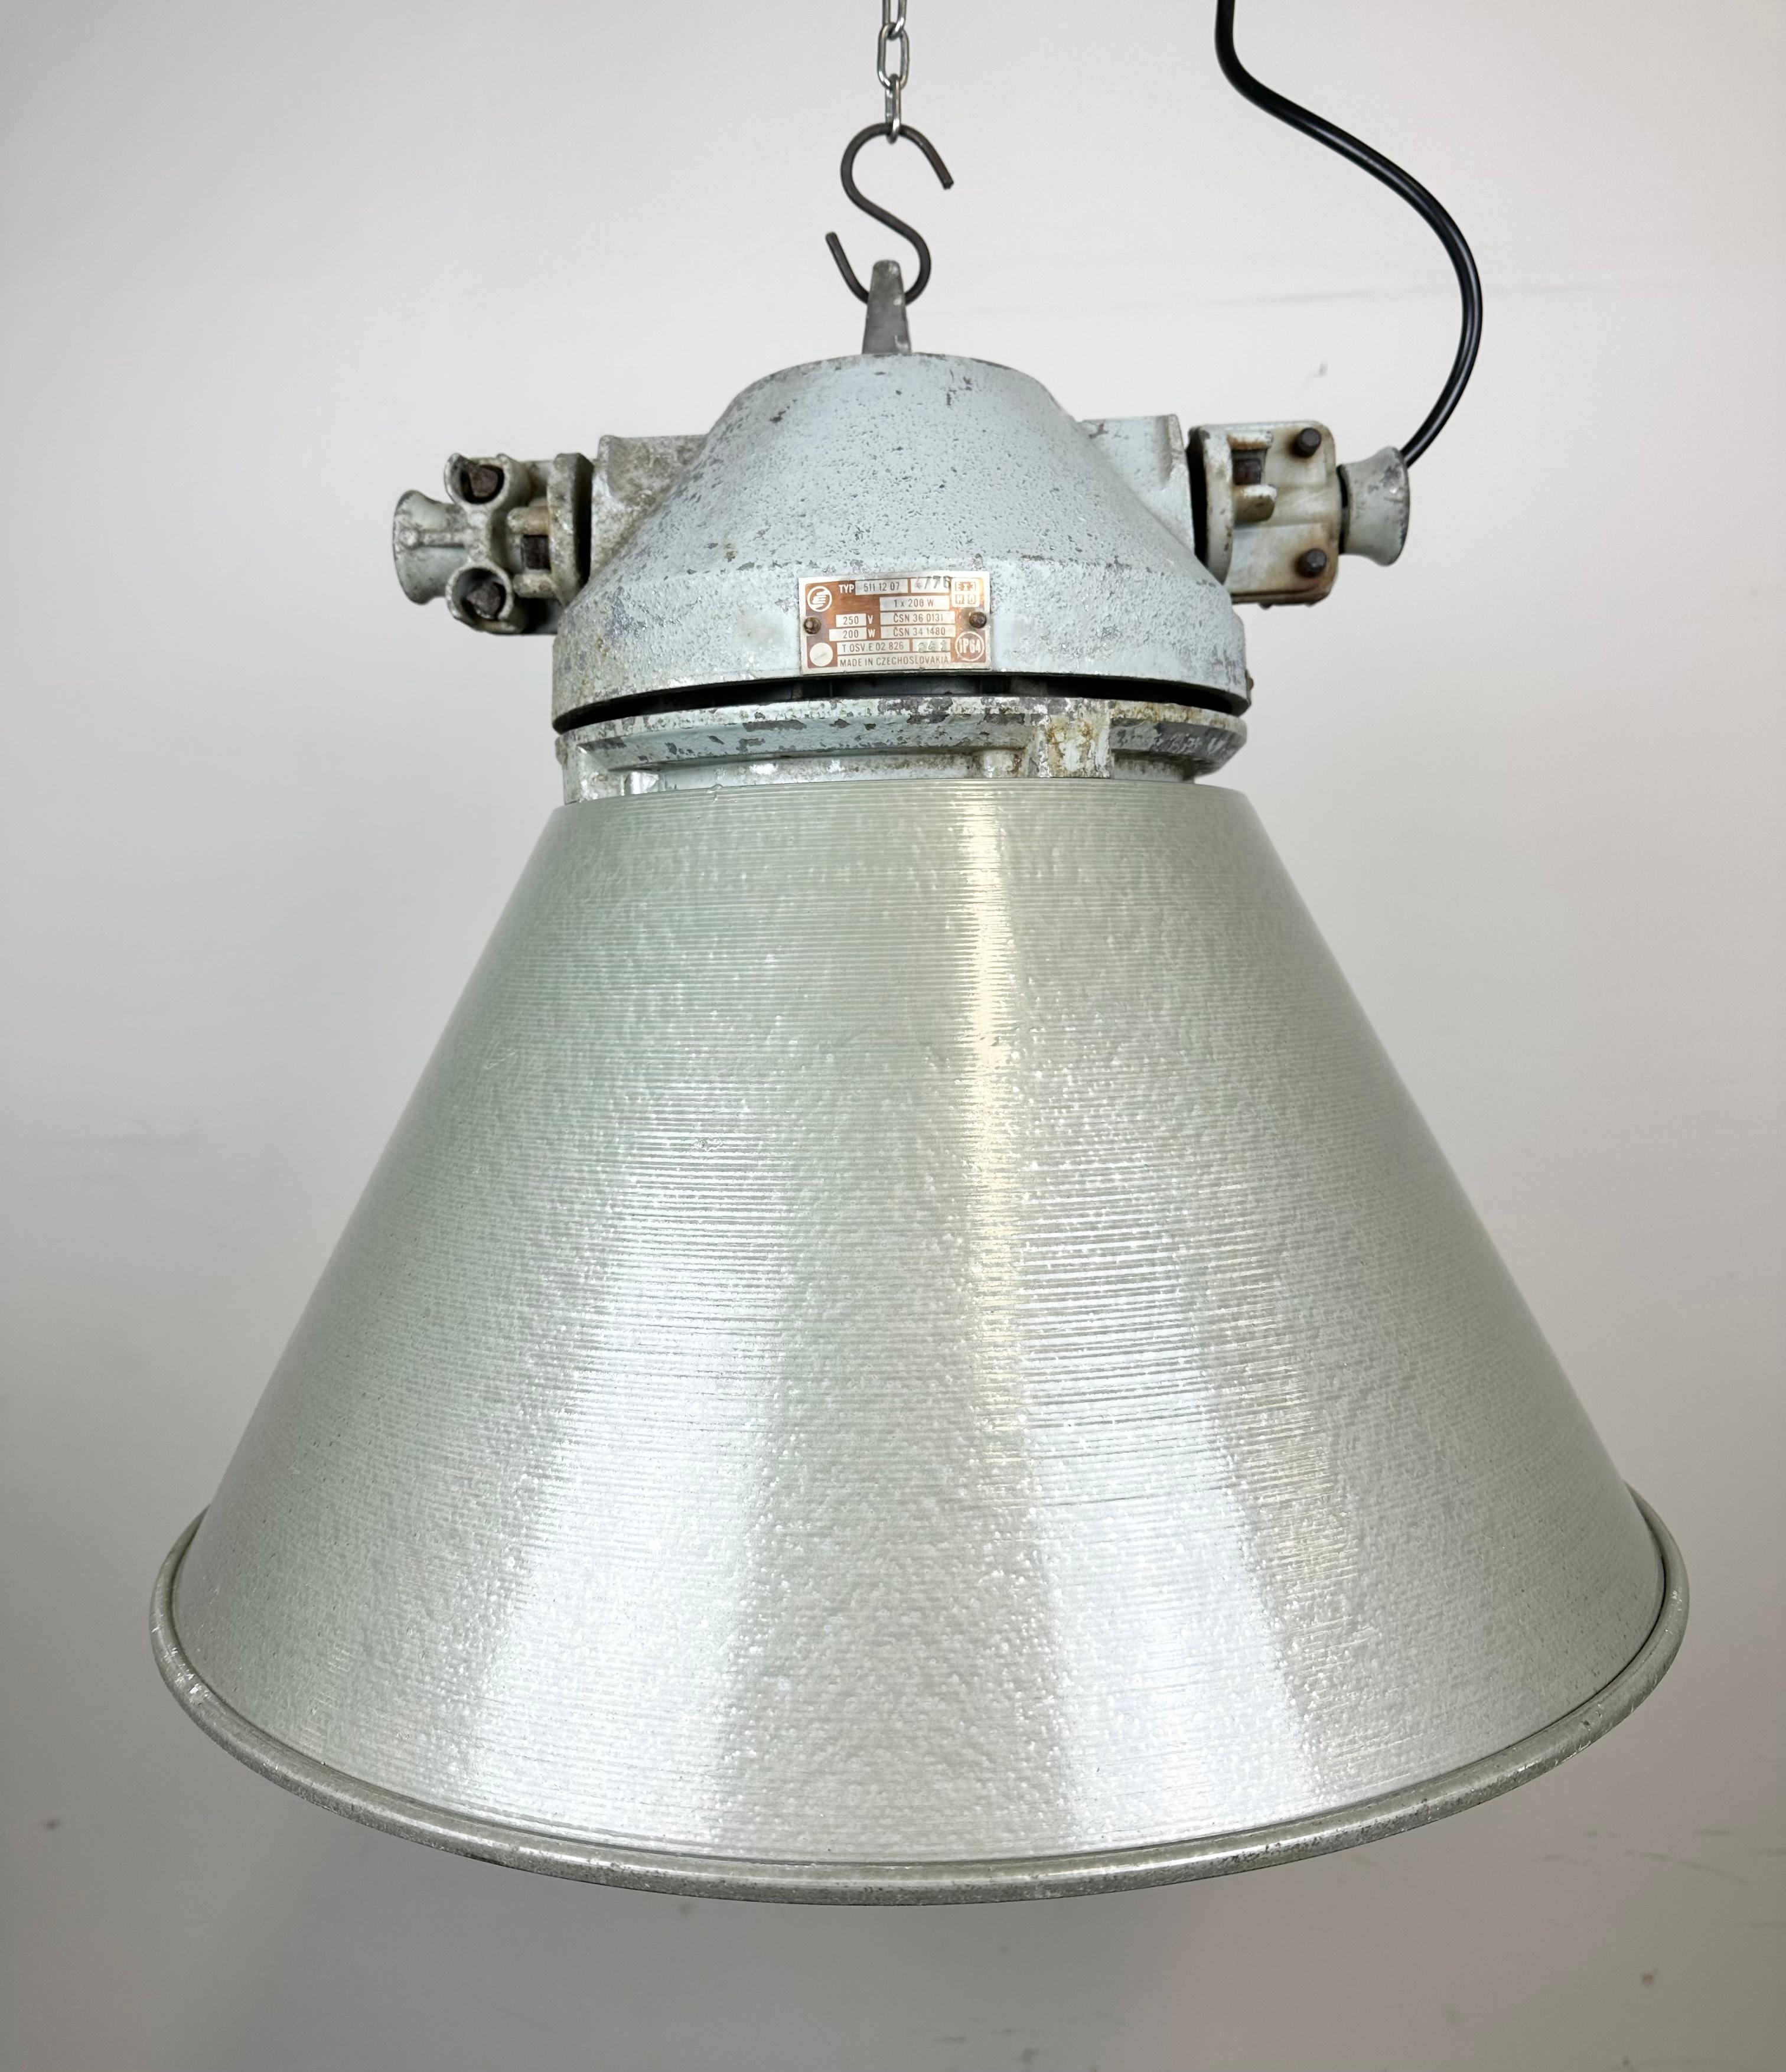 Czech Industrial Explosion Proof Lamp with Aluminium Shade from Elektrosvit, 1970s For Sale